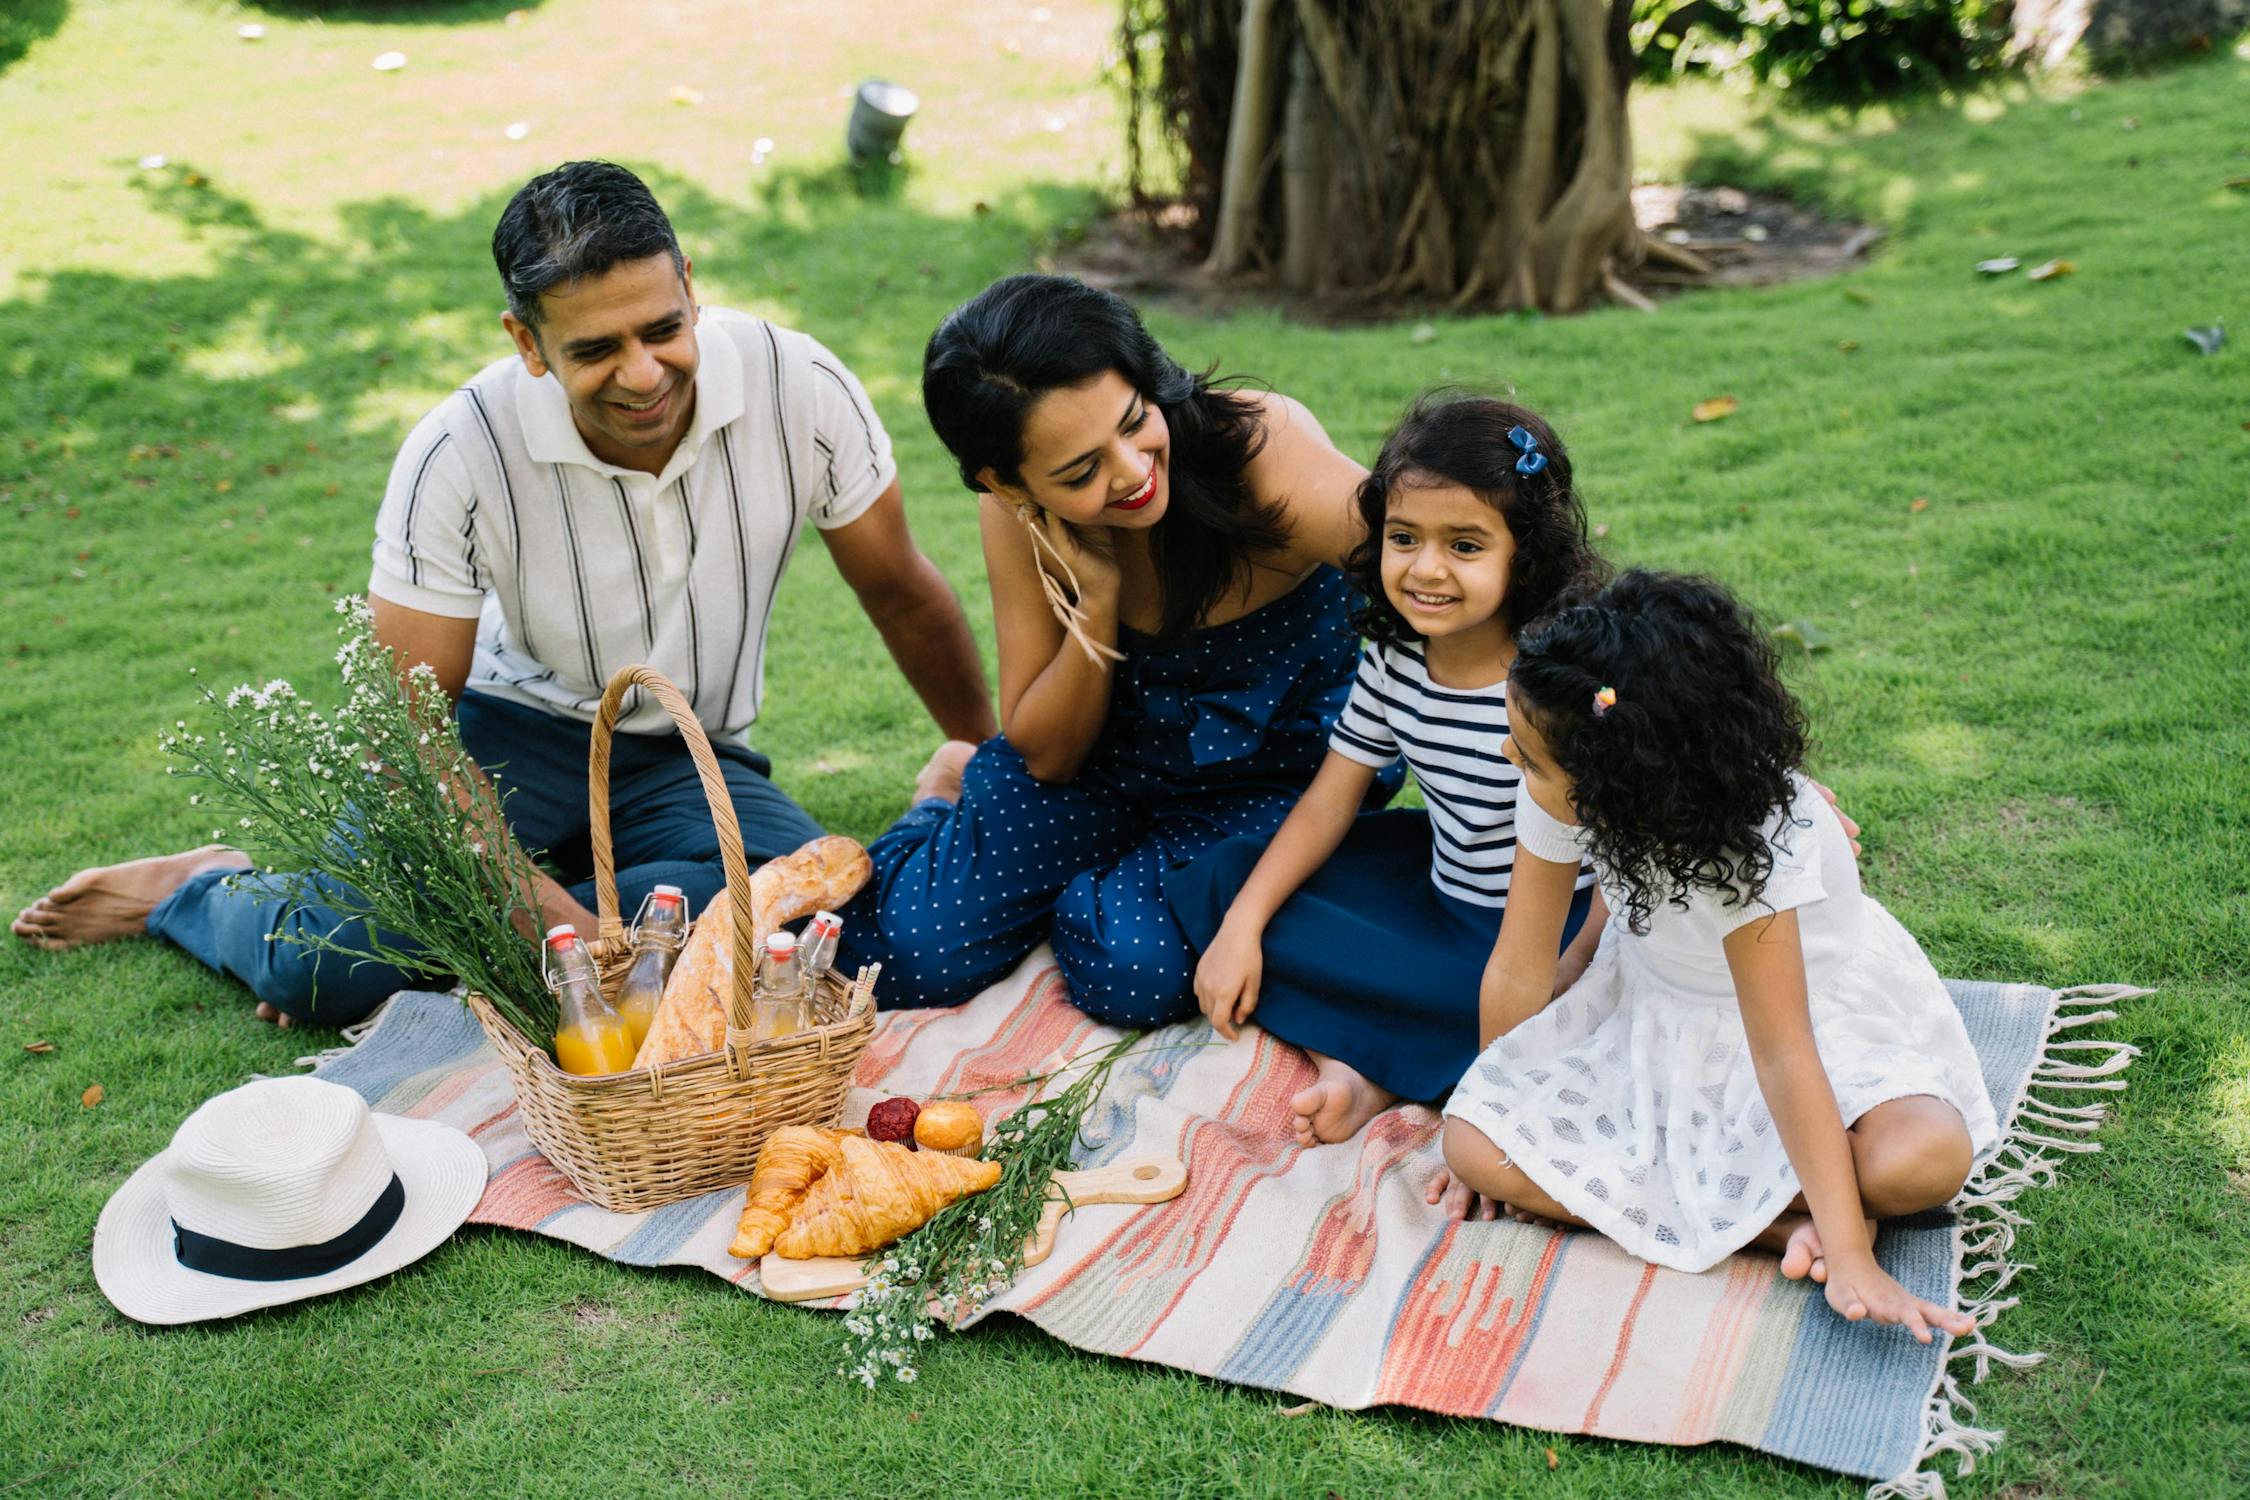 Indian Family Photo by Anna Tarazevich from Pexels: https://www.pexels.com/photo/family-having-a-picnic-5119595/